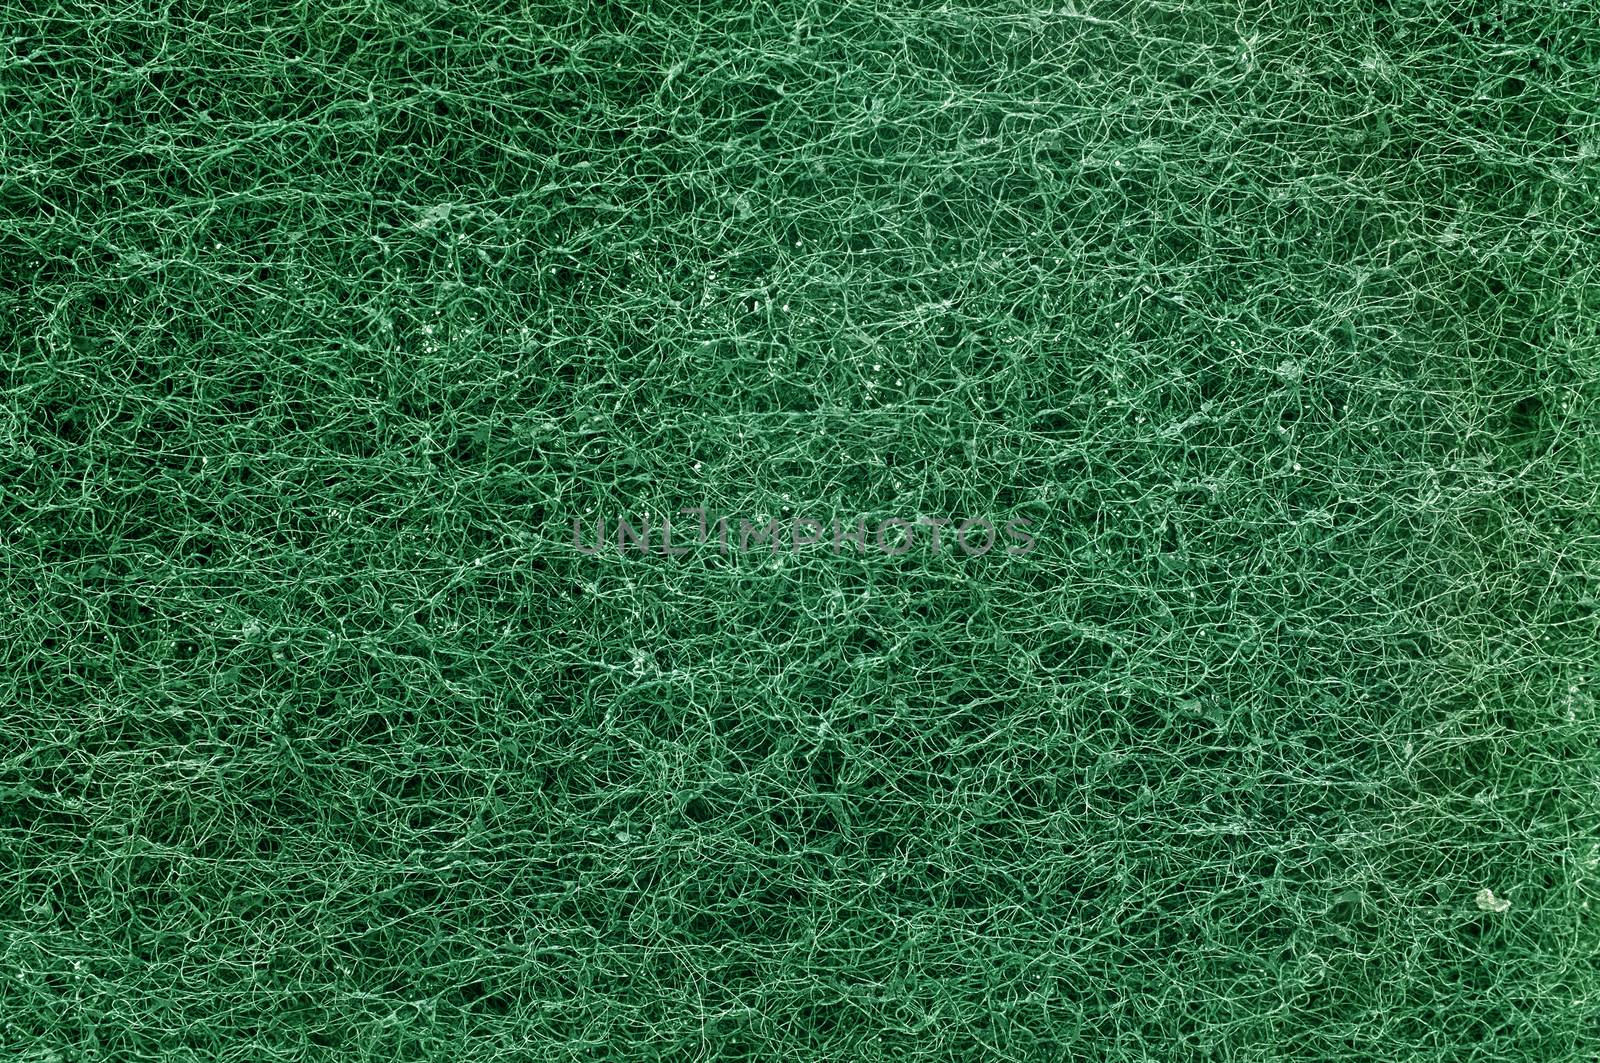 Surface texture of clean scrubber in green color for background or wallpaper